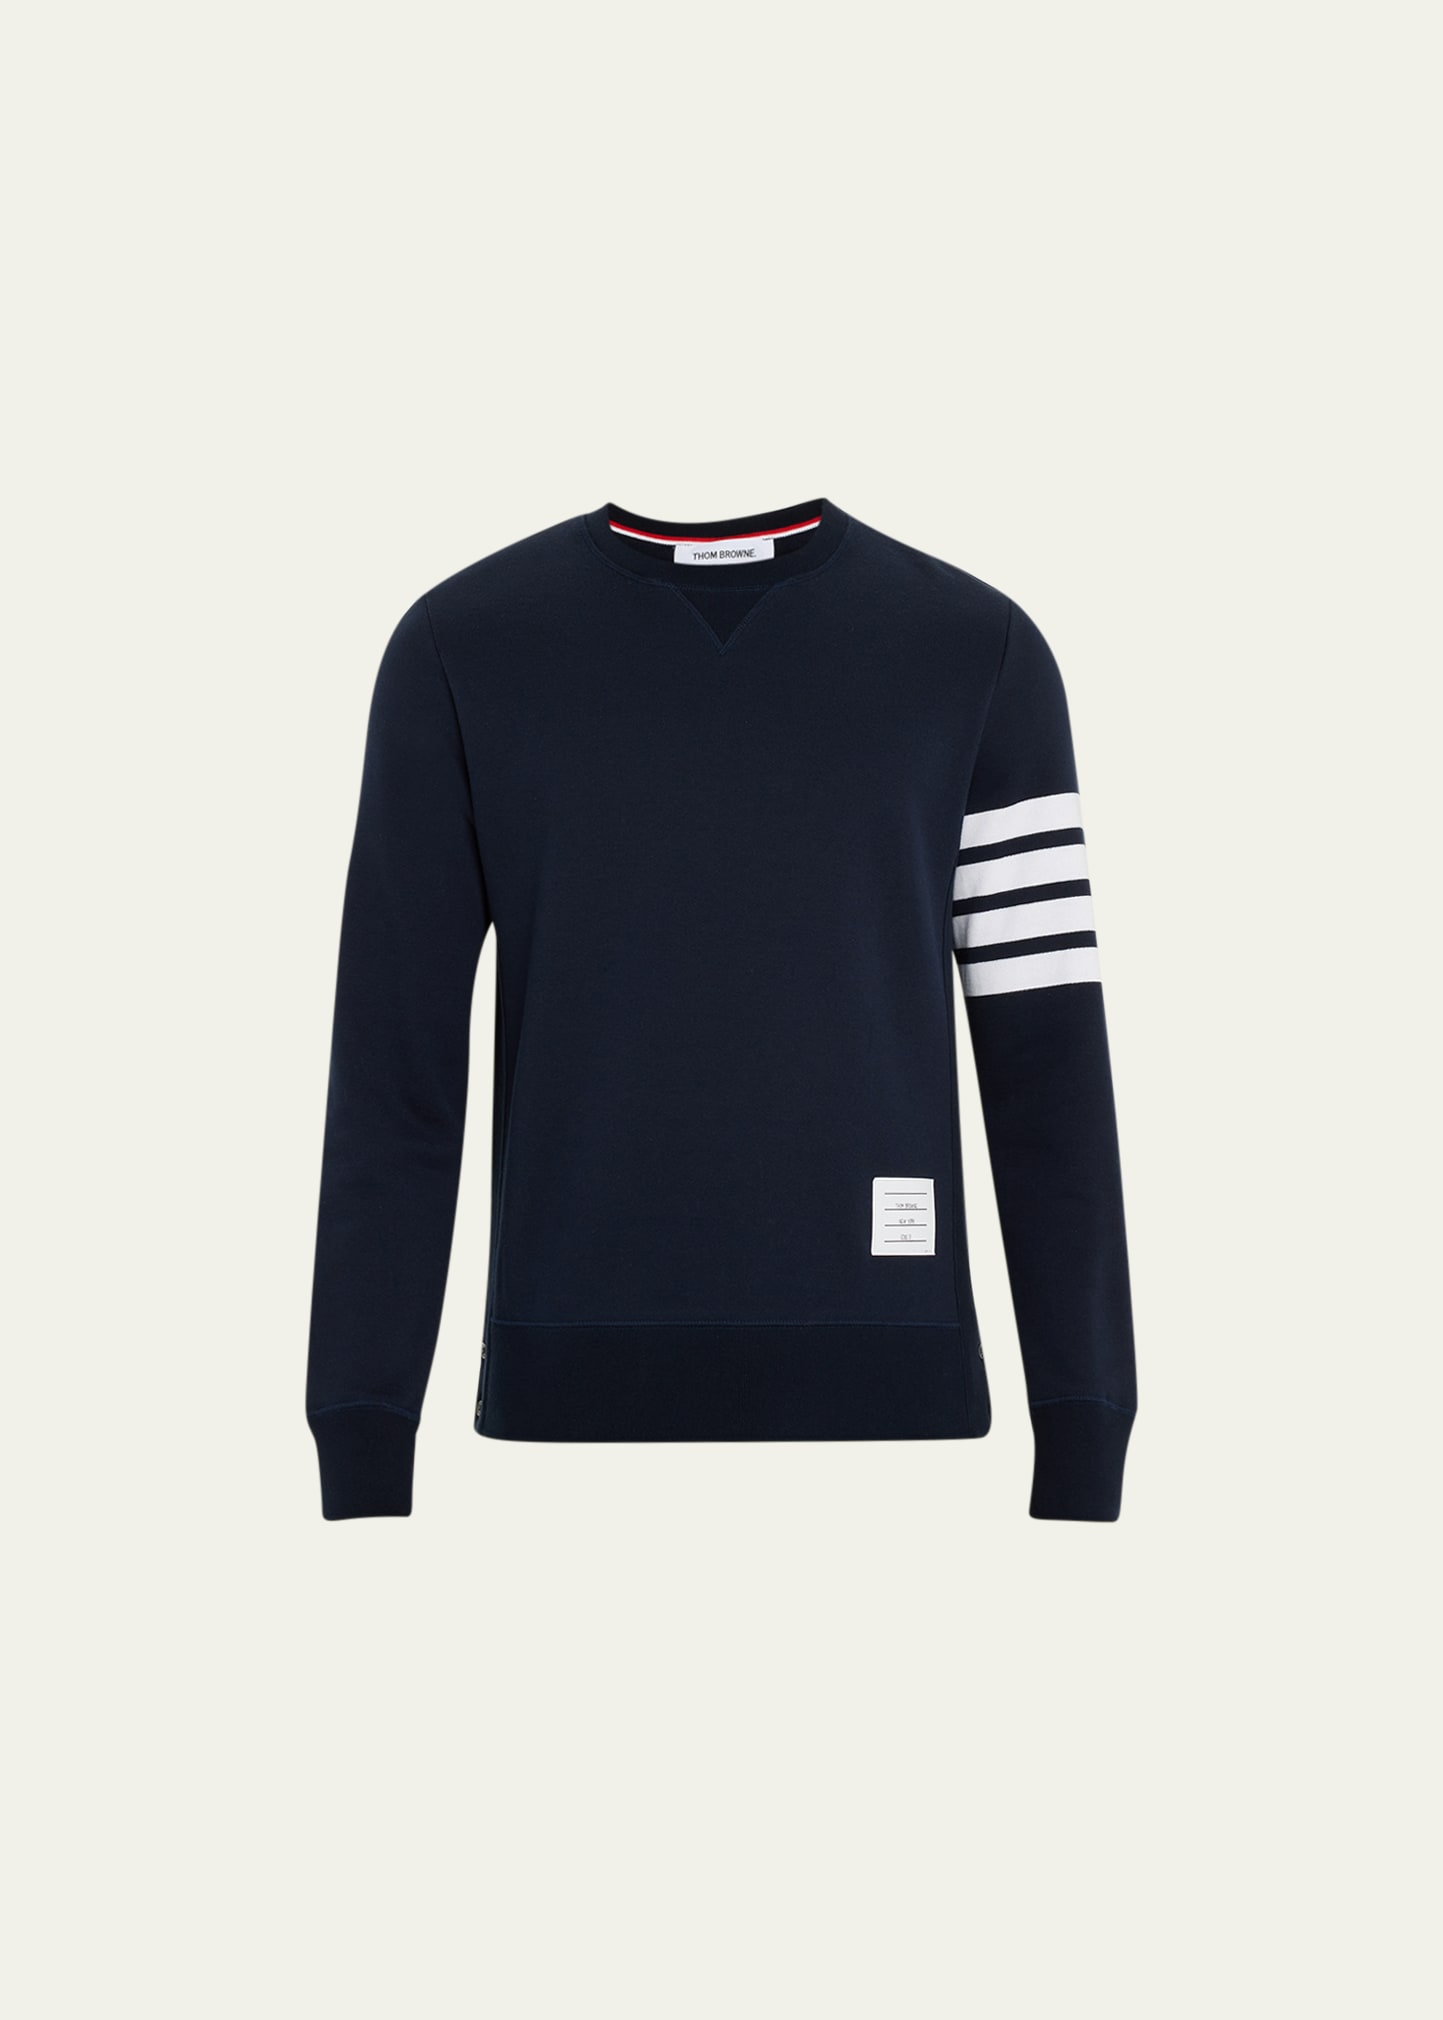 Thom Browne Men's Classic Crewneck Sweatshirt With Striped Sleeve In Navy